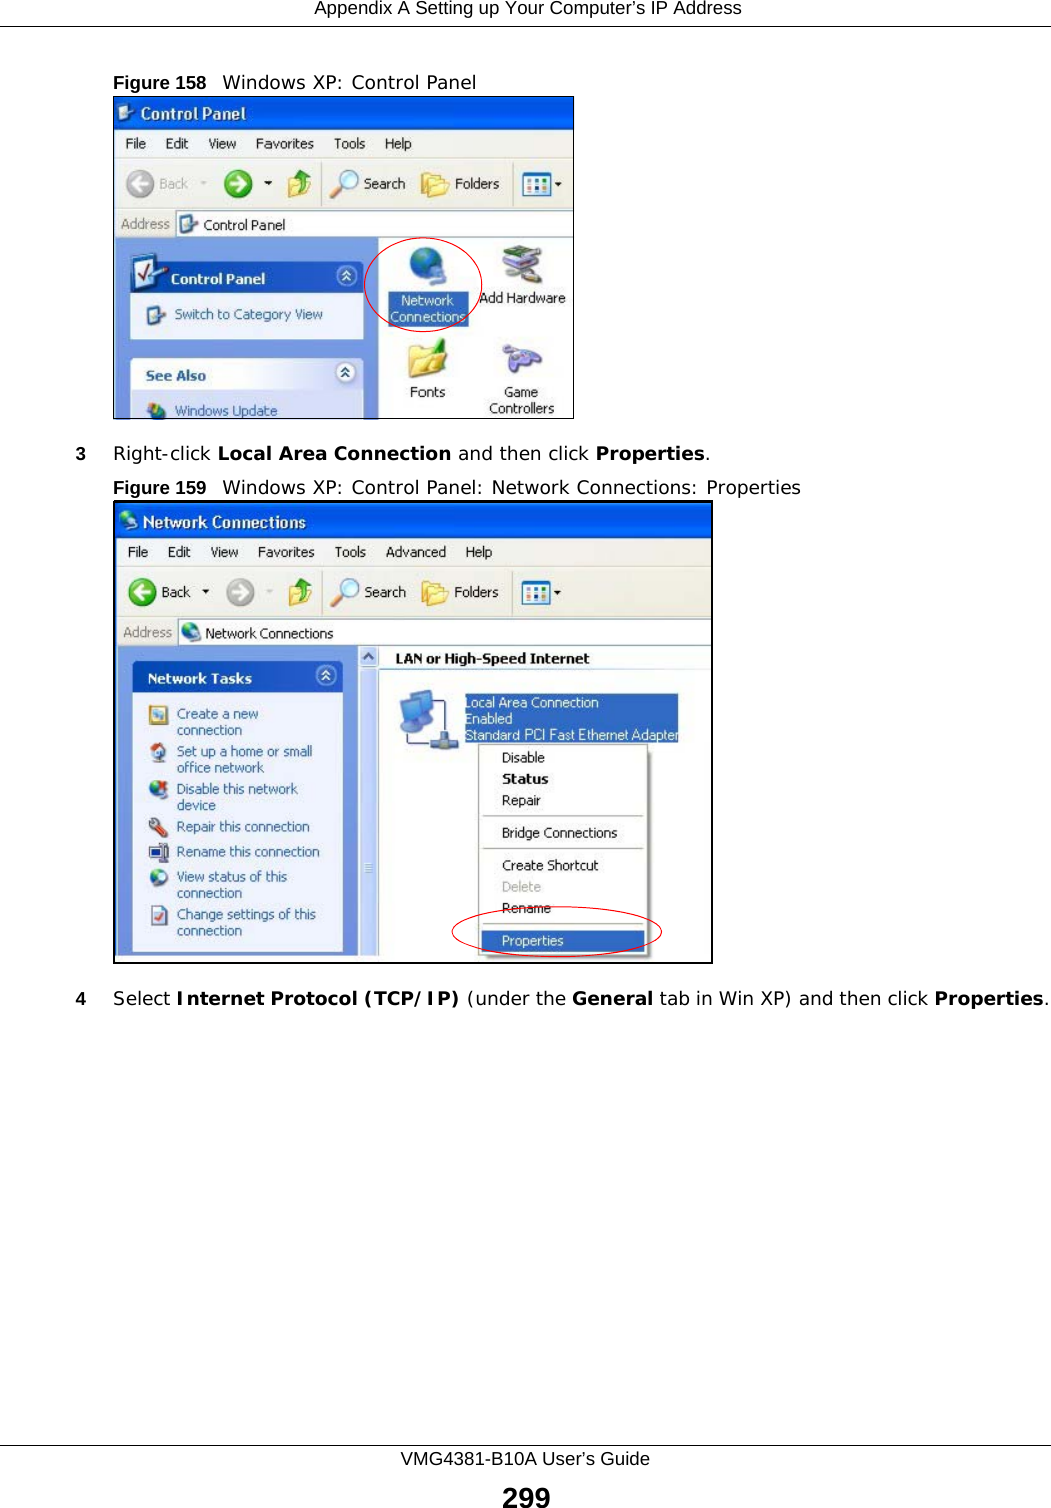  Appendix A Setting up Your Computer’s IP AddressVMG4381-B10A User’s Guide299Figure 158   Windows XP: Control Panel3Right-click Local Area Connection and then click Properties.Figure 159   Windows XP: Control Panel: Network Connections: Properties4Select Internet Protocol (TCP/IP) (under the General tab in Win XP) and then click Properties.